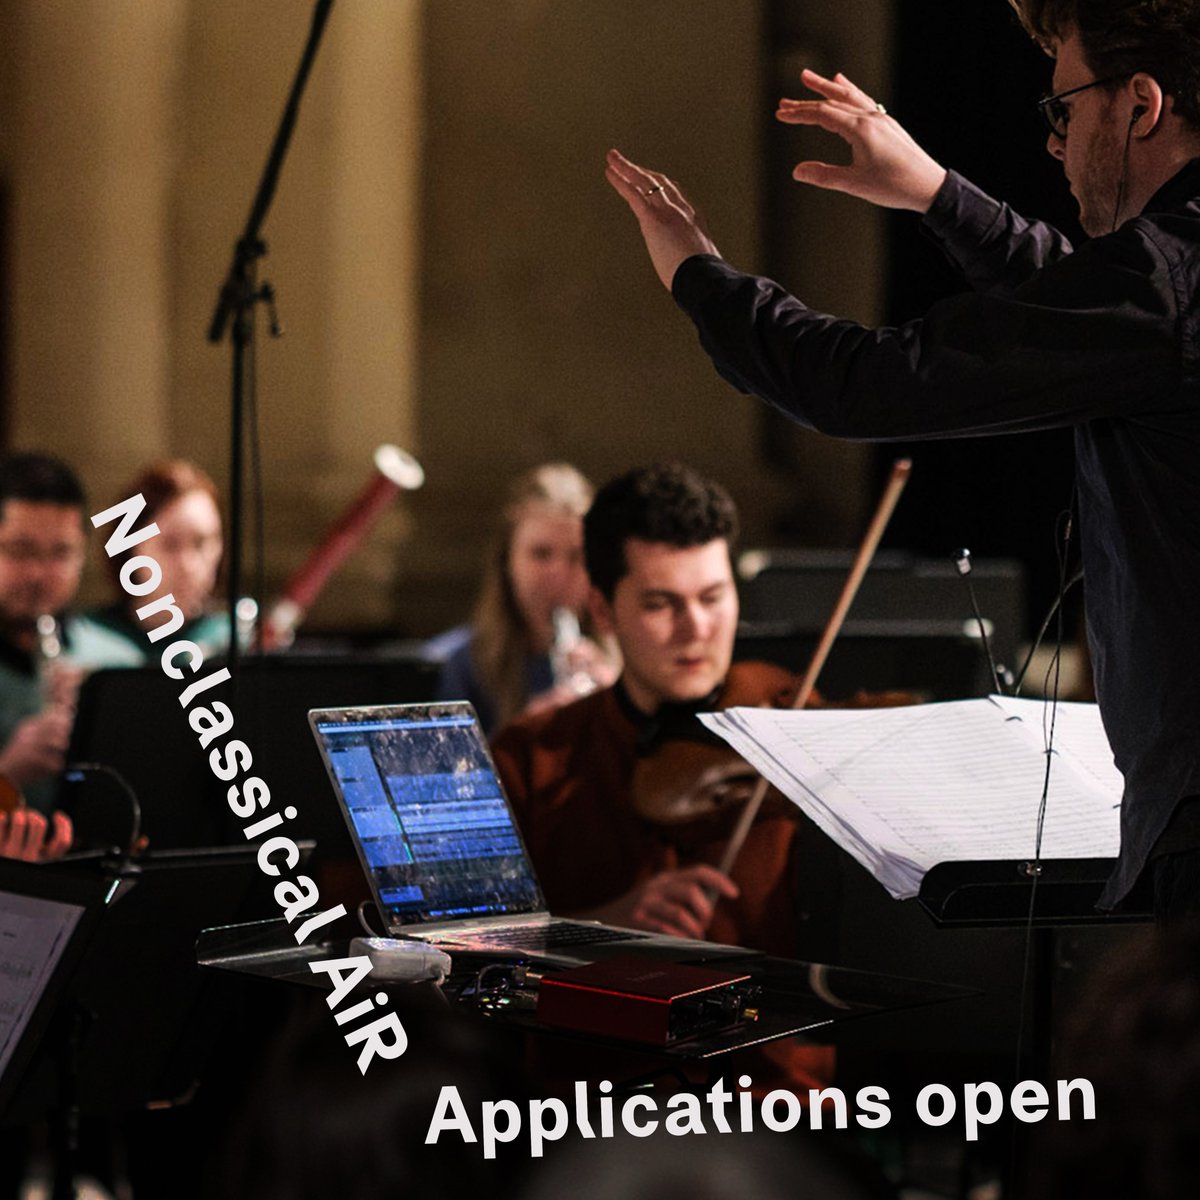 Nonclassical AiR - APPLICATIONS OPEN 🌟 Become one of our 4 Artists in Residence, supported by @JerwoodArts #DevelopingArtistsFund, @PRSfoundation Open Fund, & @VWFndn With @SouthbankSinf, @CoMA_NewMusic, @her_ensemble, & @zeitge_ist More info + apply 👉nonclassical.co.uk/nonclassical-a…